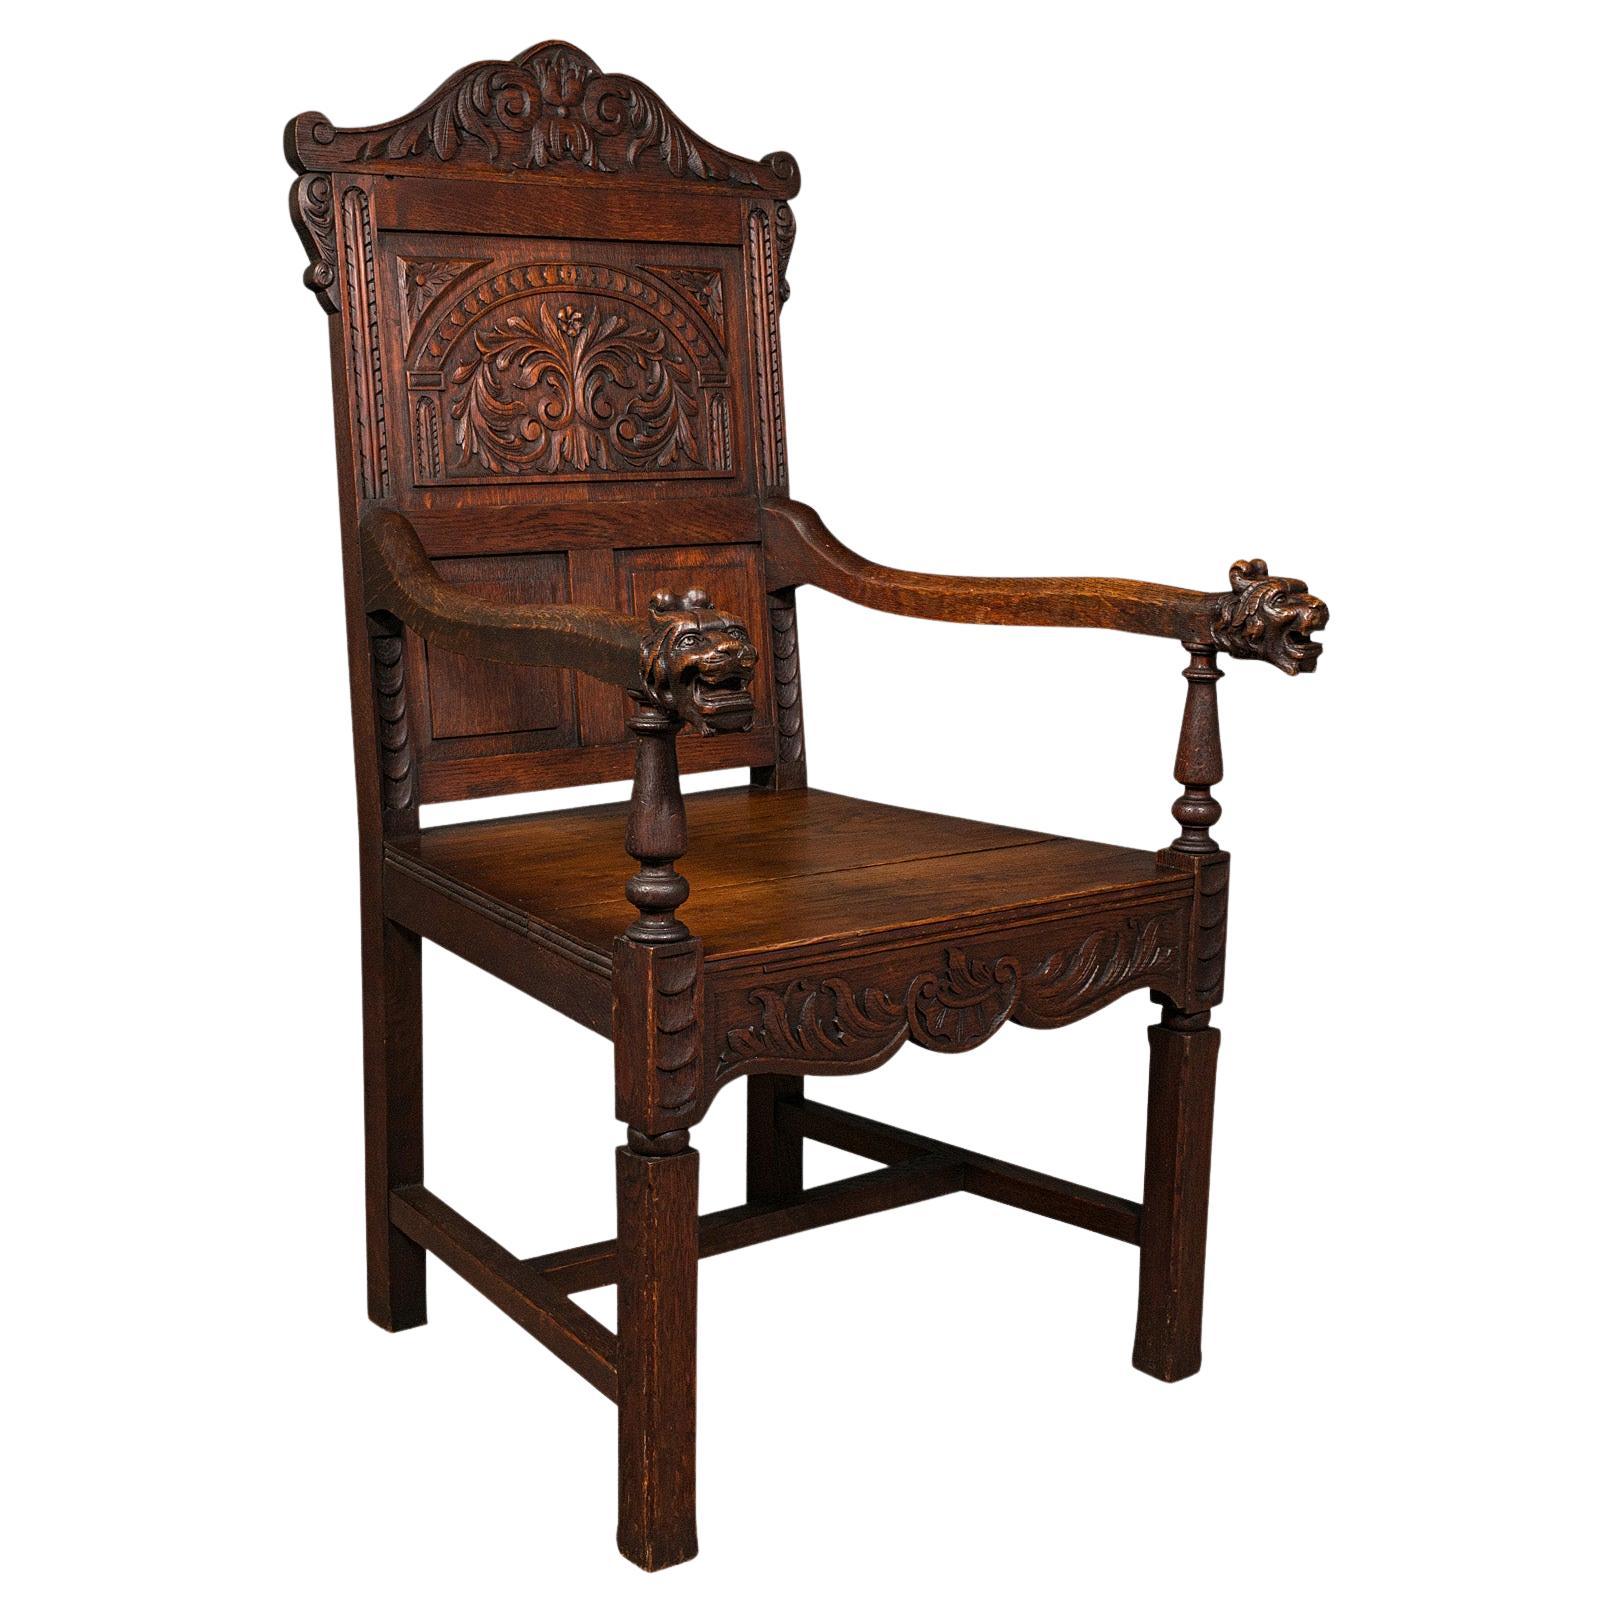 Antique Carved Hall Chair, Scottish, Oak, Decorative Elbow Seat, Victorian, 1860